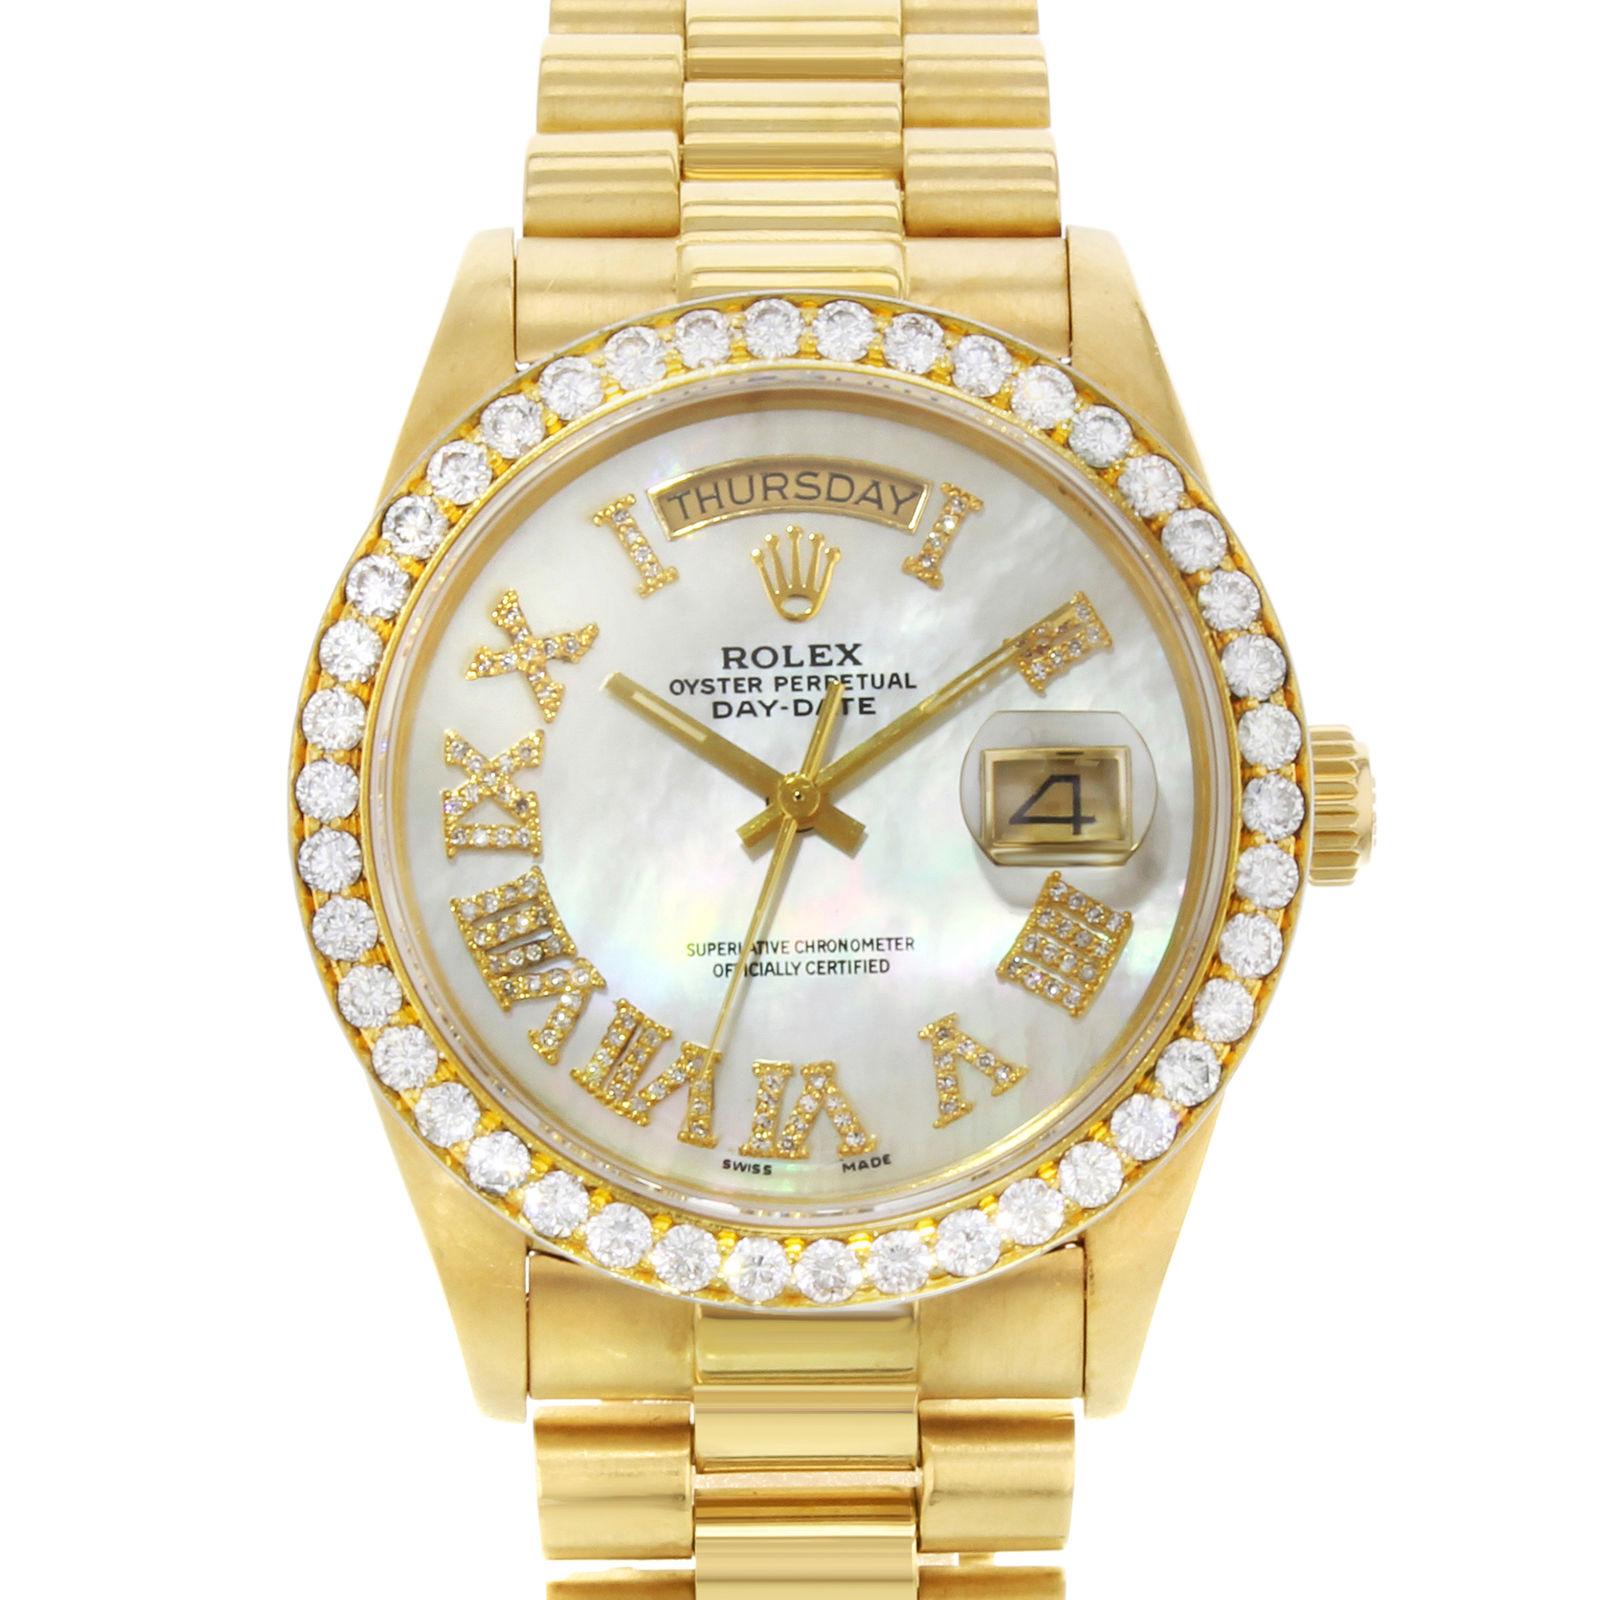 This pre-owned Rolex Day Date 18038 is a beautiful men's timepiece that is powered by an automatic movement which is cased in a yellow gold case. It has a round shape face, day & date, diamonds dial and has hand arabic numerals style markers. It is